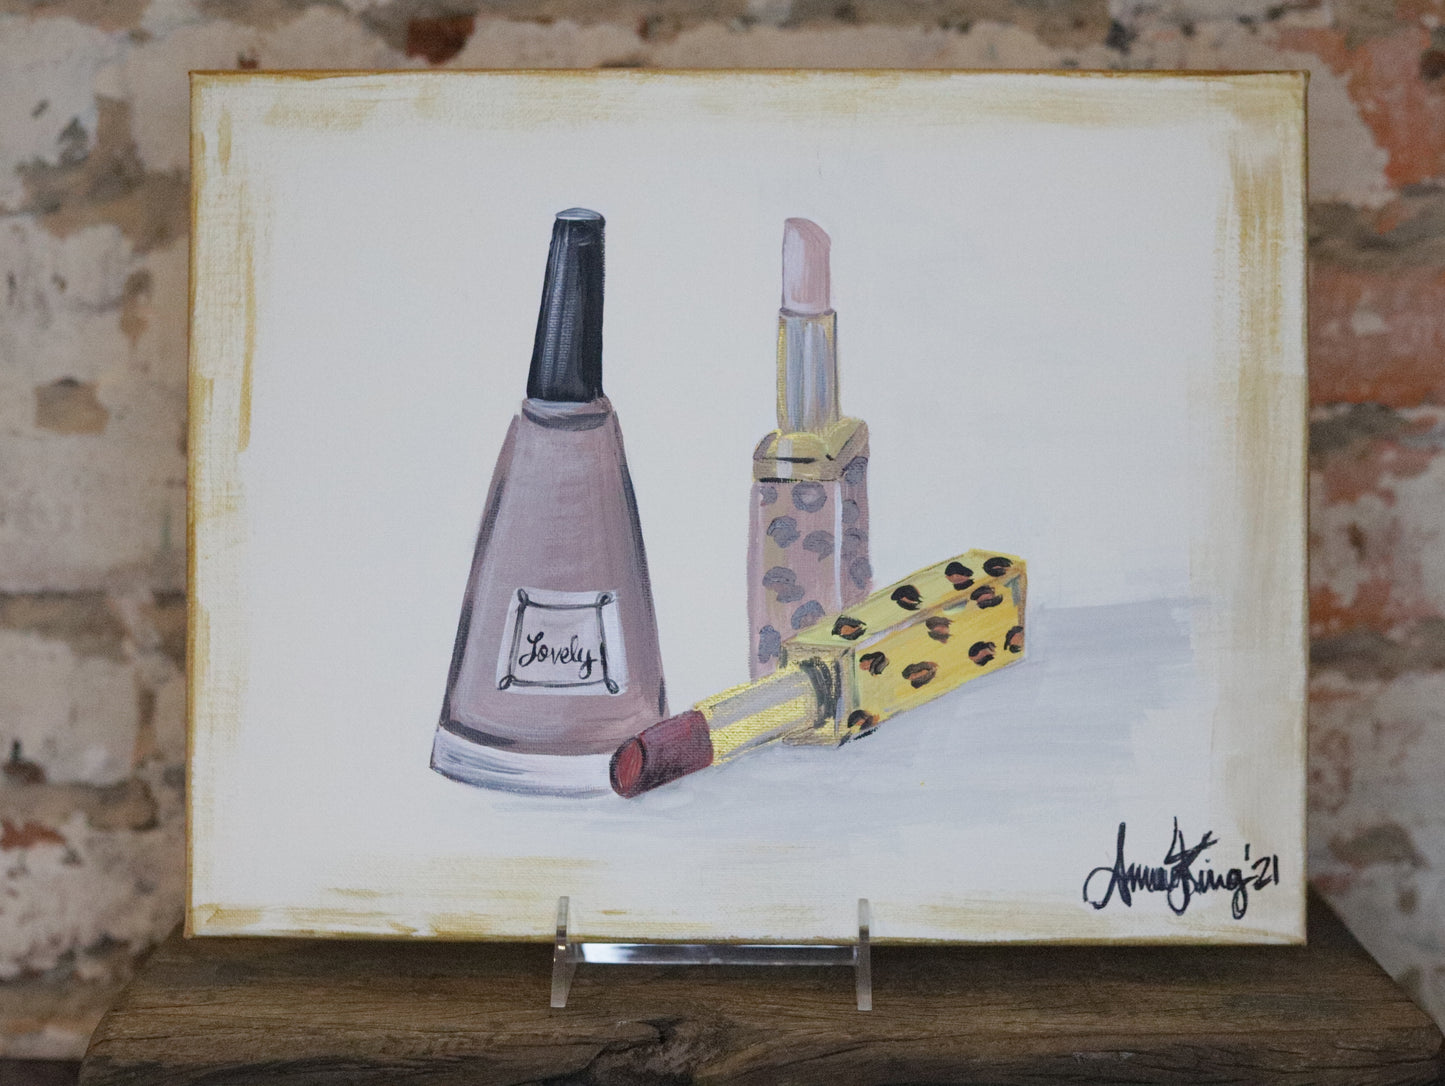 LEOPARD LIPSTICK AND POLISH PAINTING